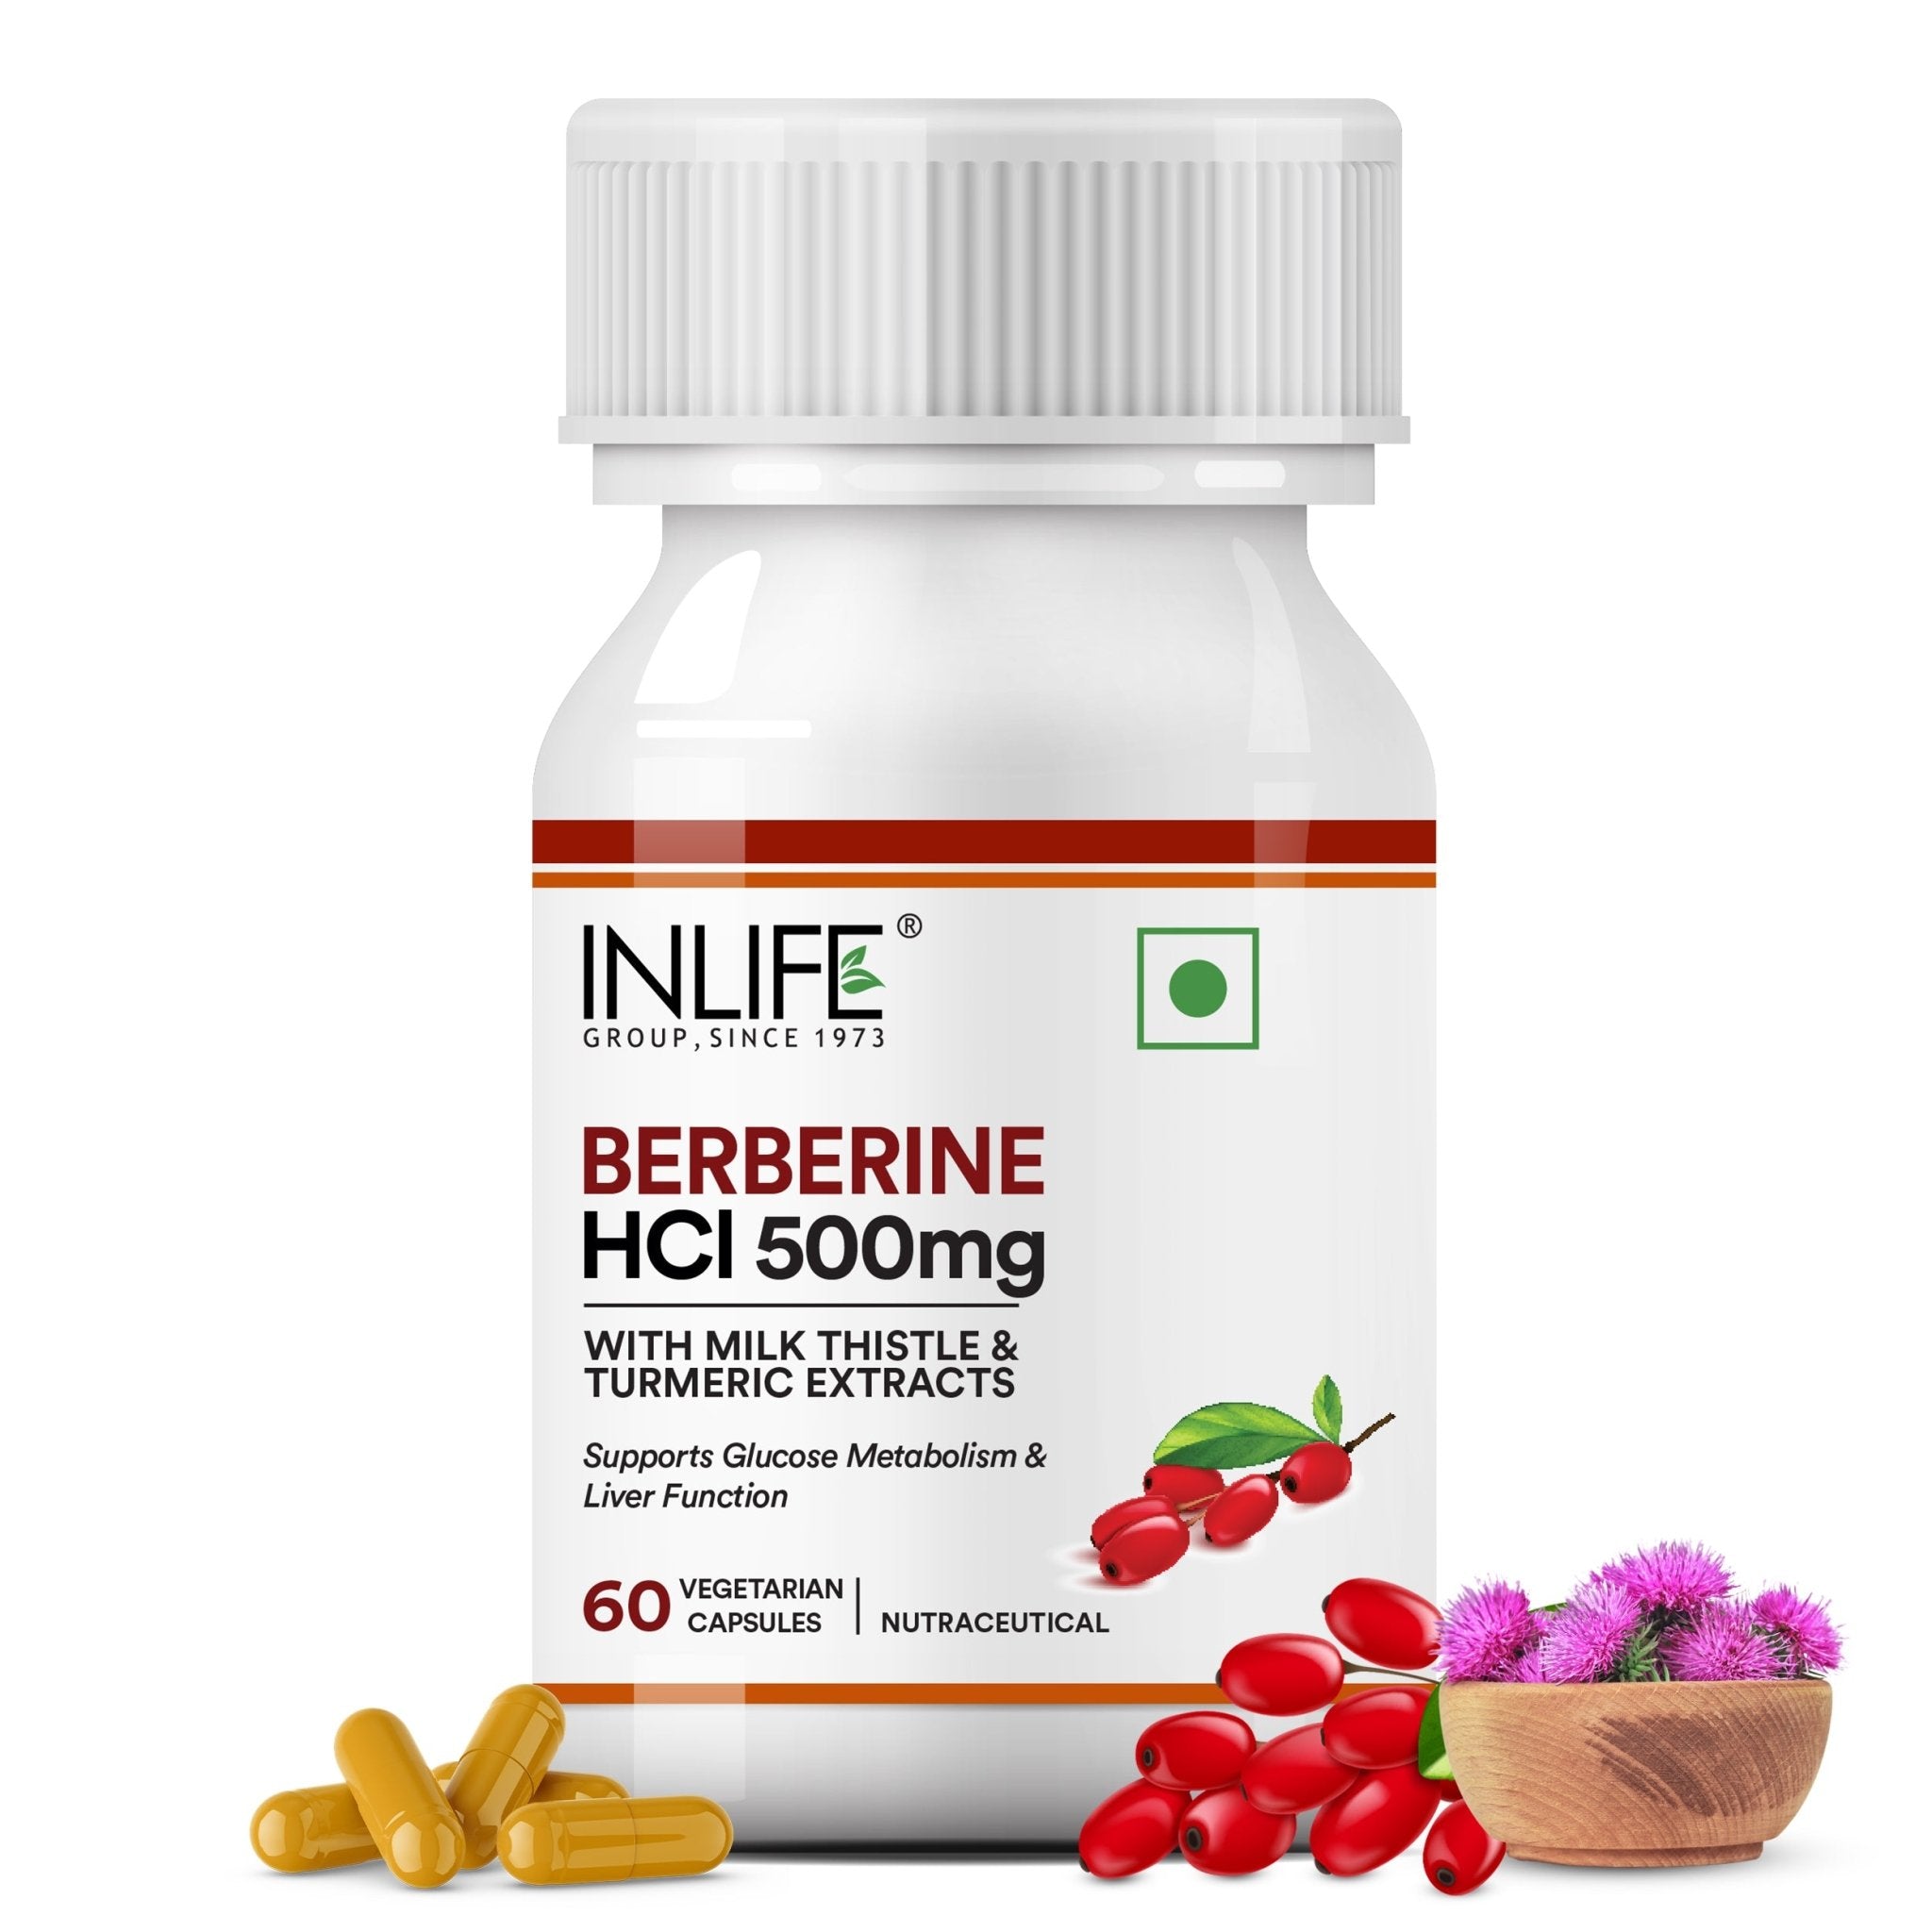 INLIFE Berberine Supplement with HCl 500mg, Milk Thistle & Turmeric | 60 Veg. Capsules - Inlife Pharma Private Limited